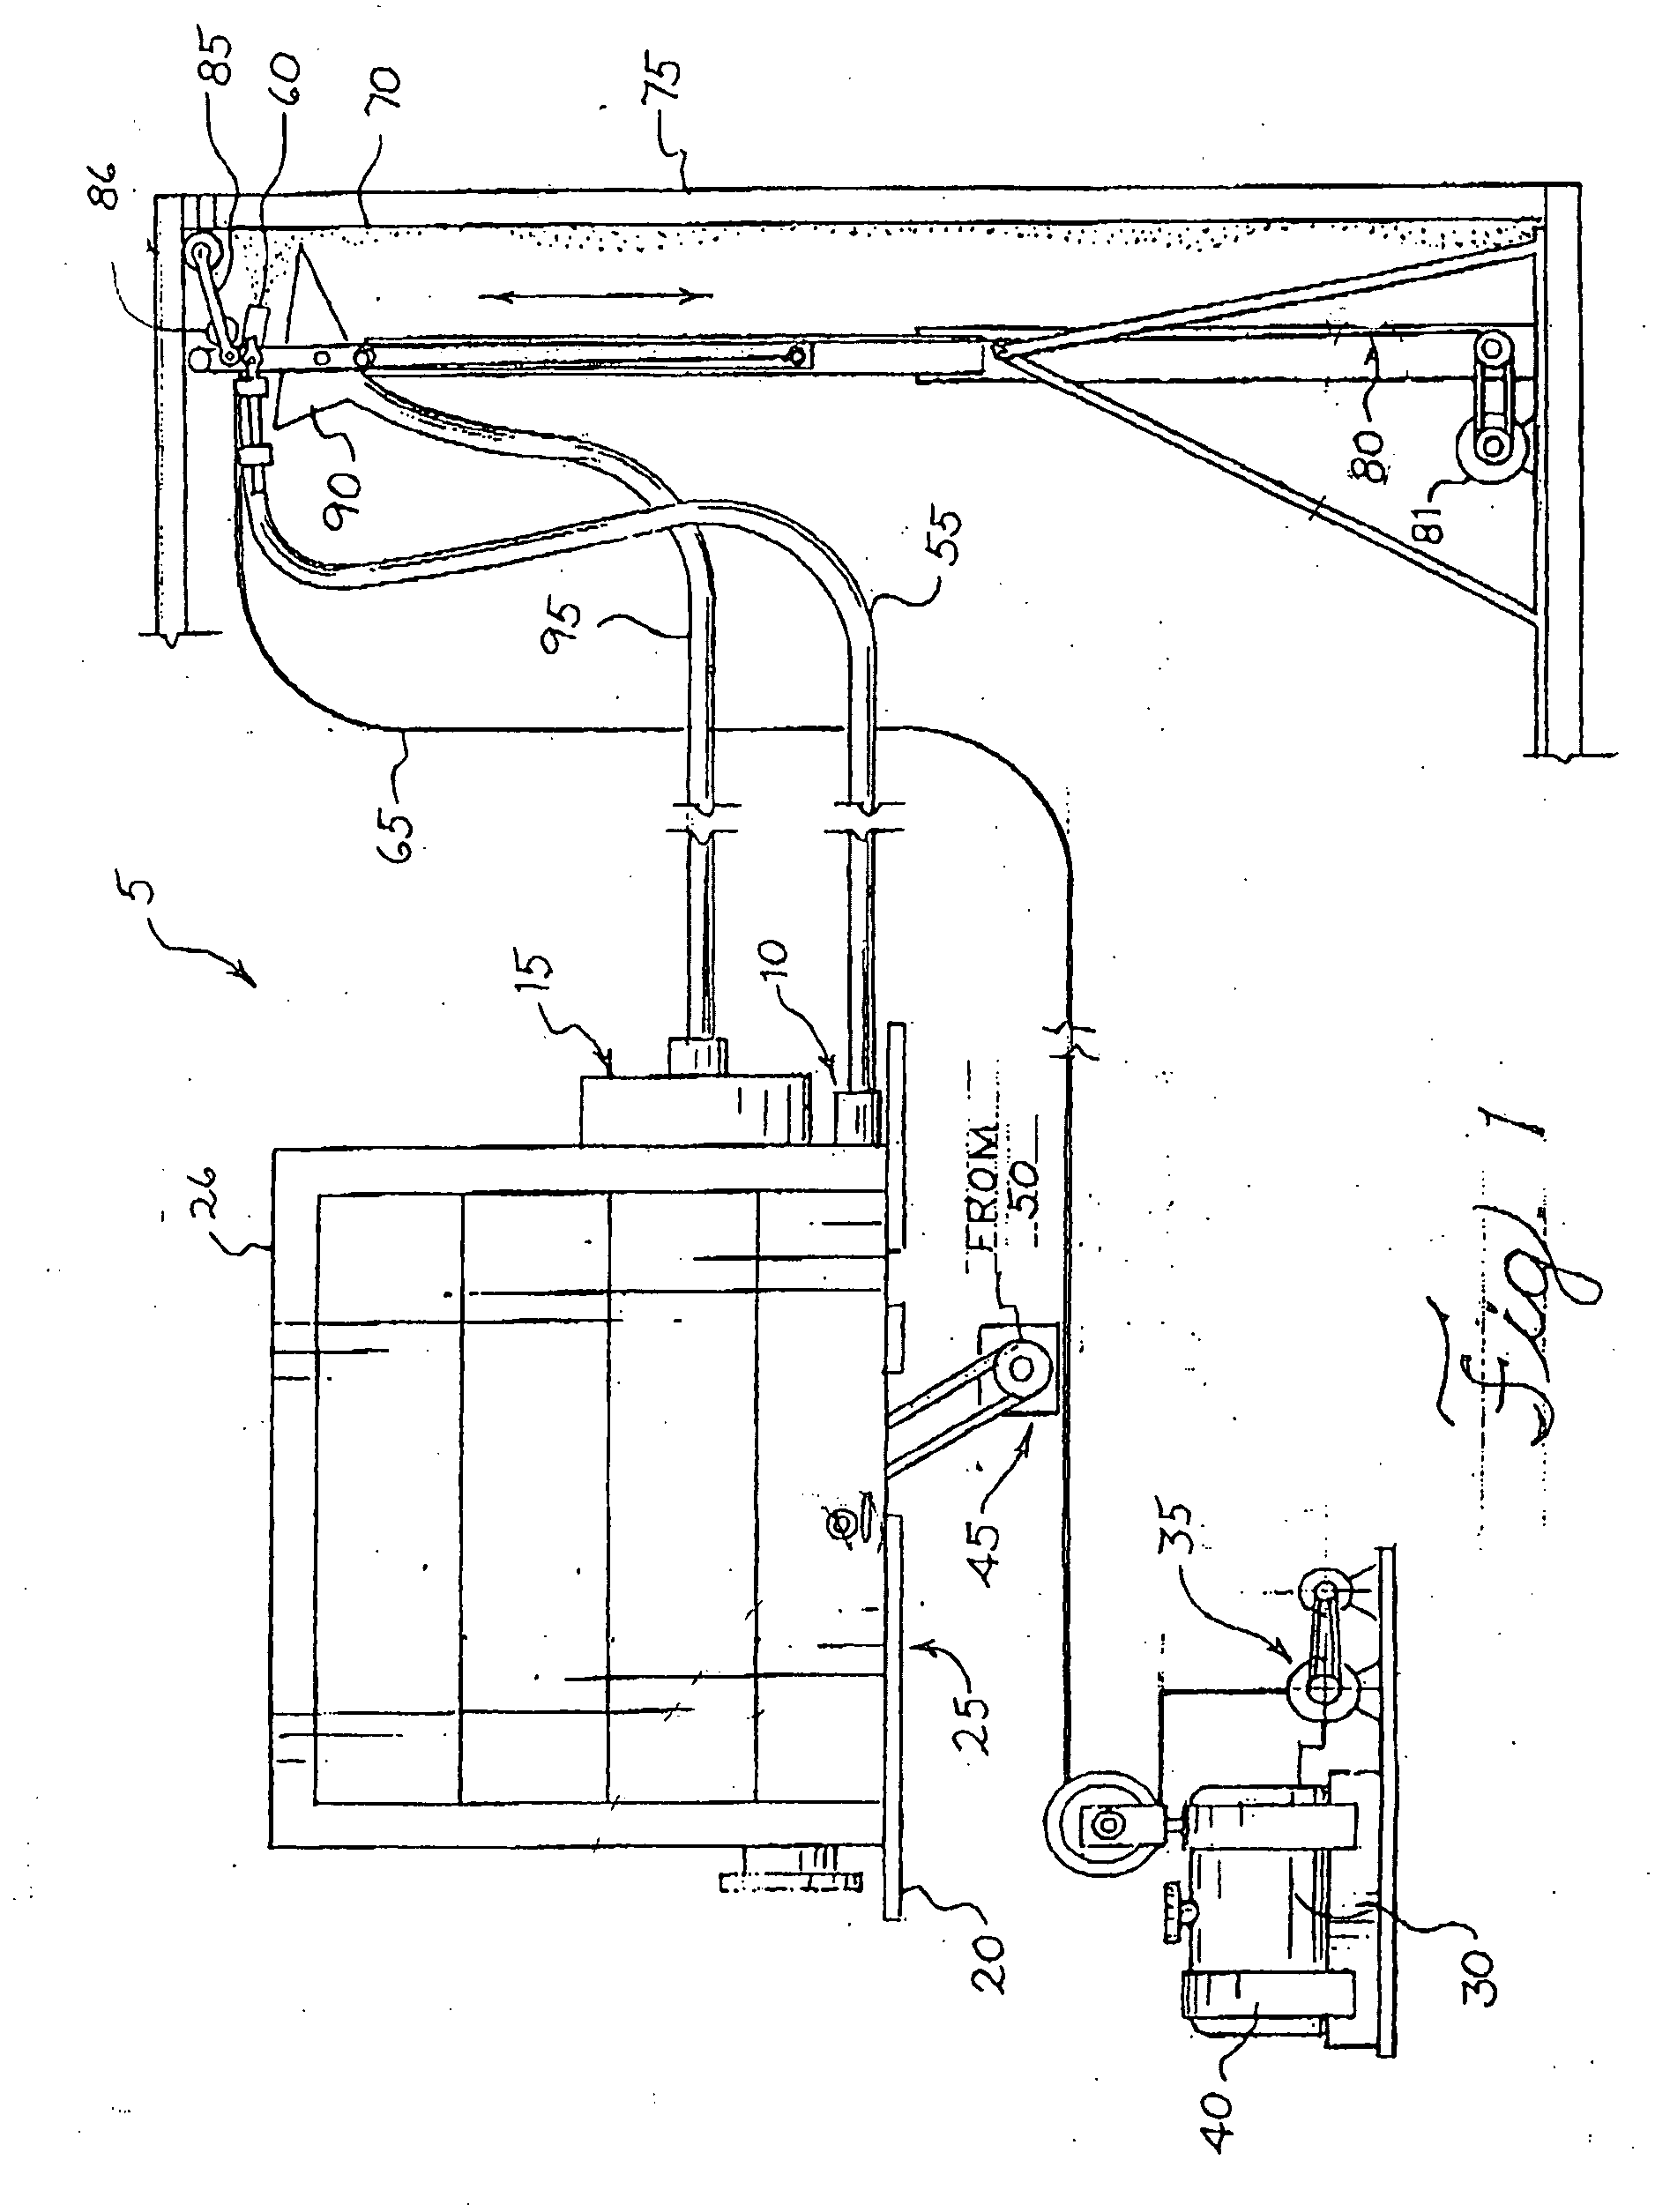 Sprayed insulation application system having variably locatable components